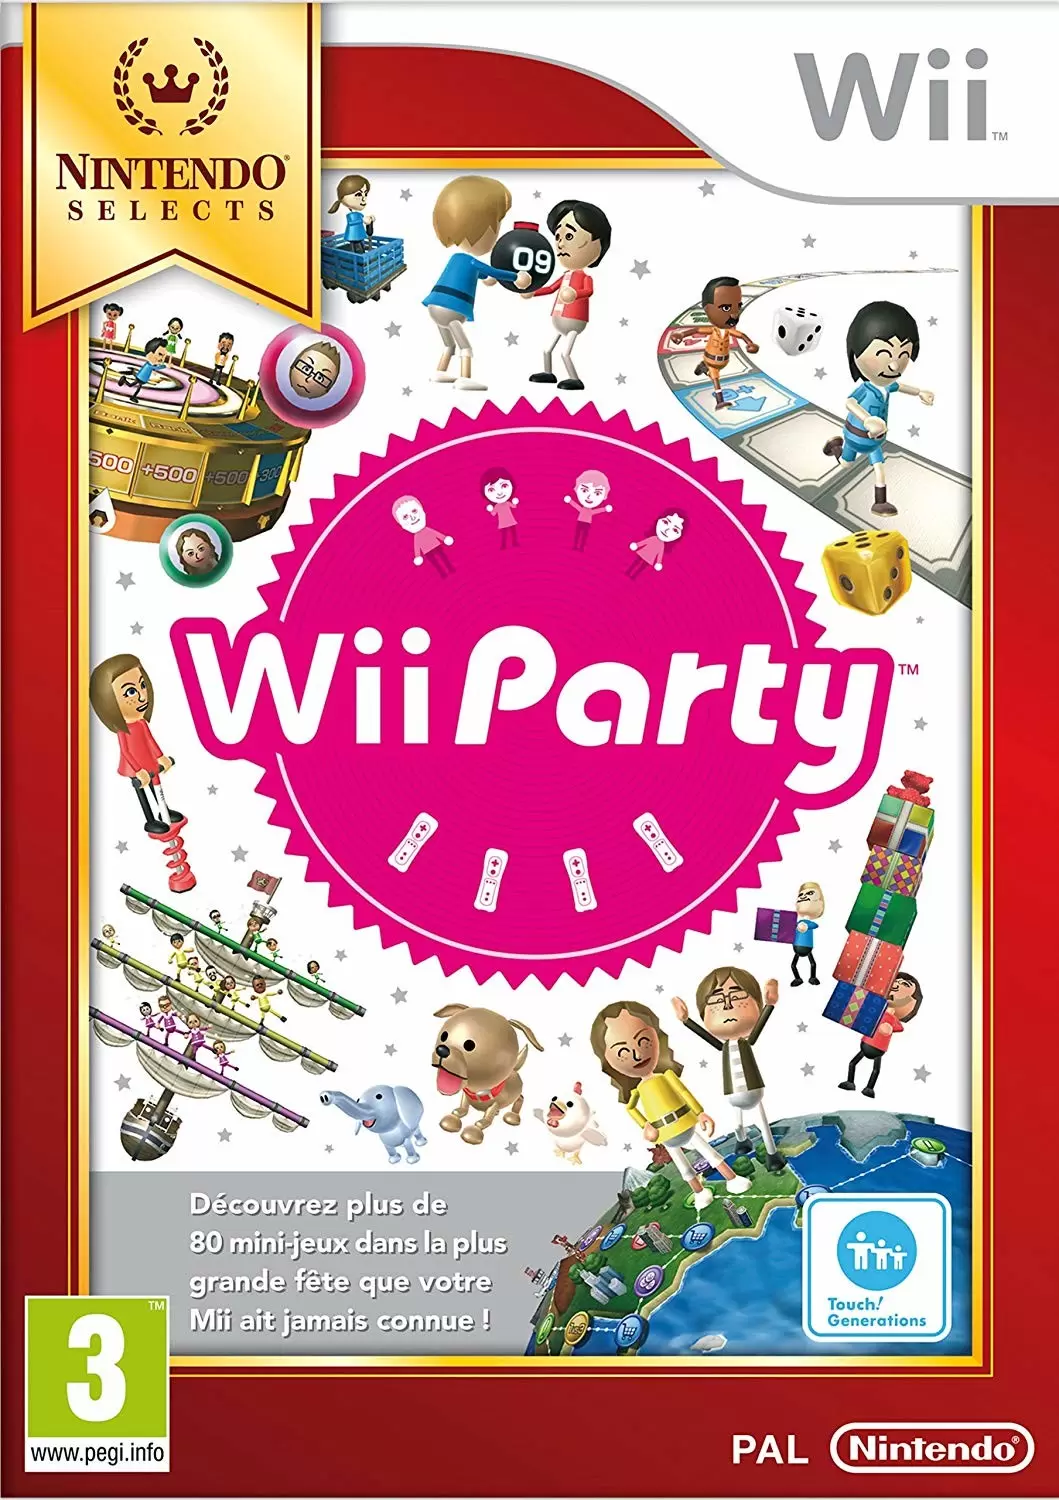 Nintendo Wii Games - Wii Party (Nintendo Selects)